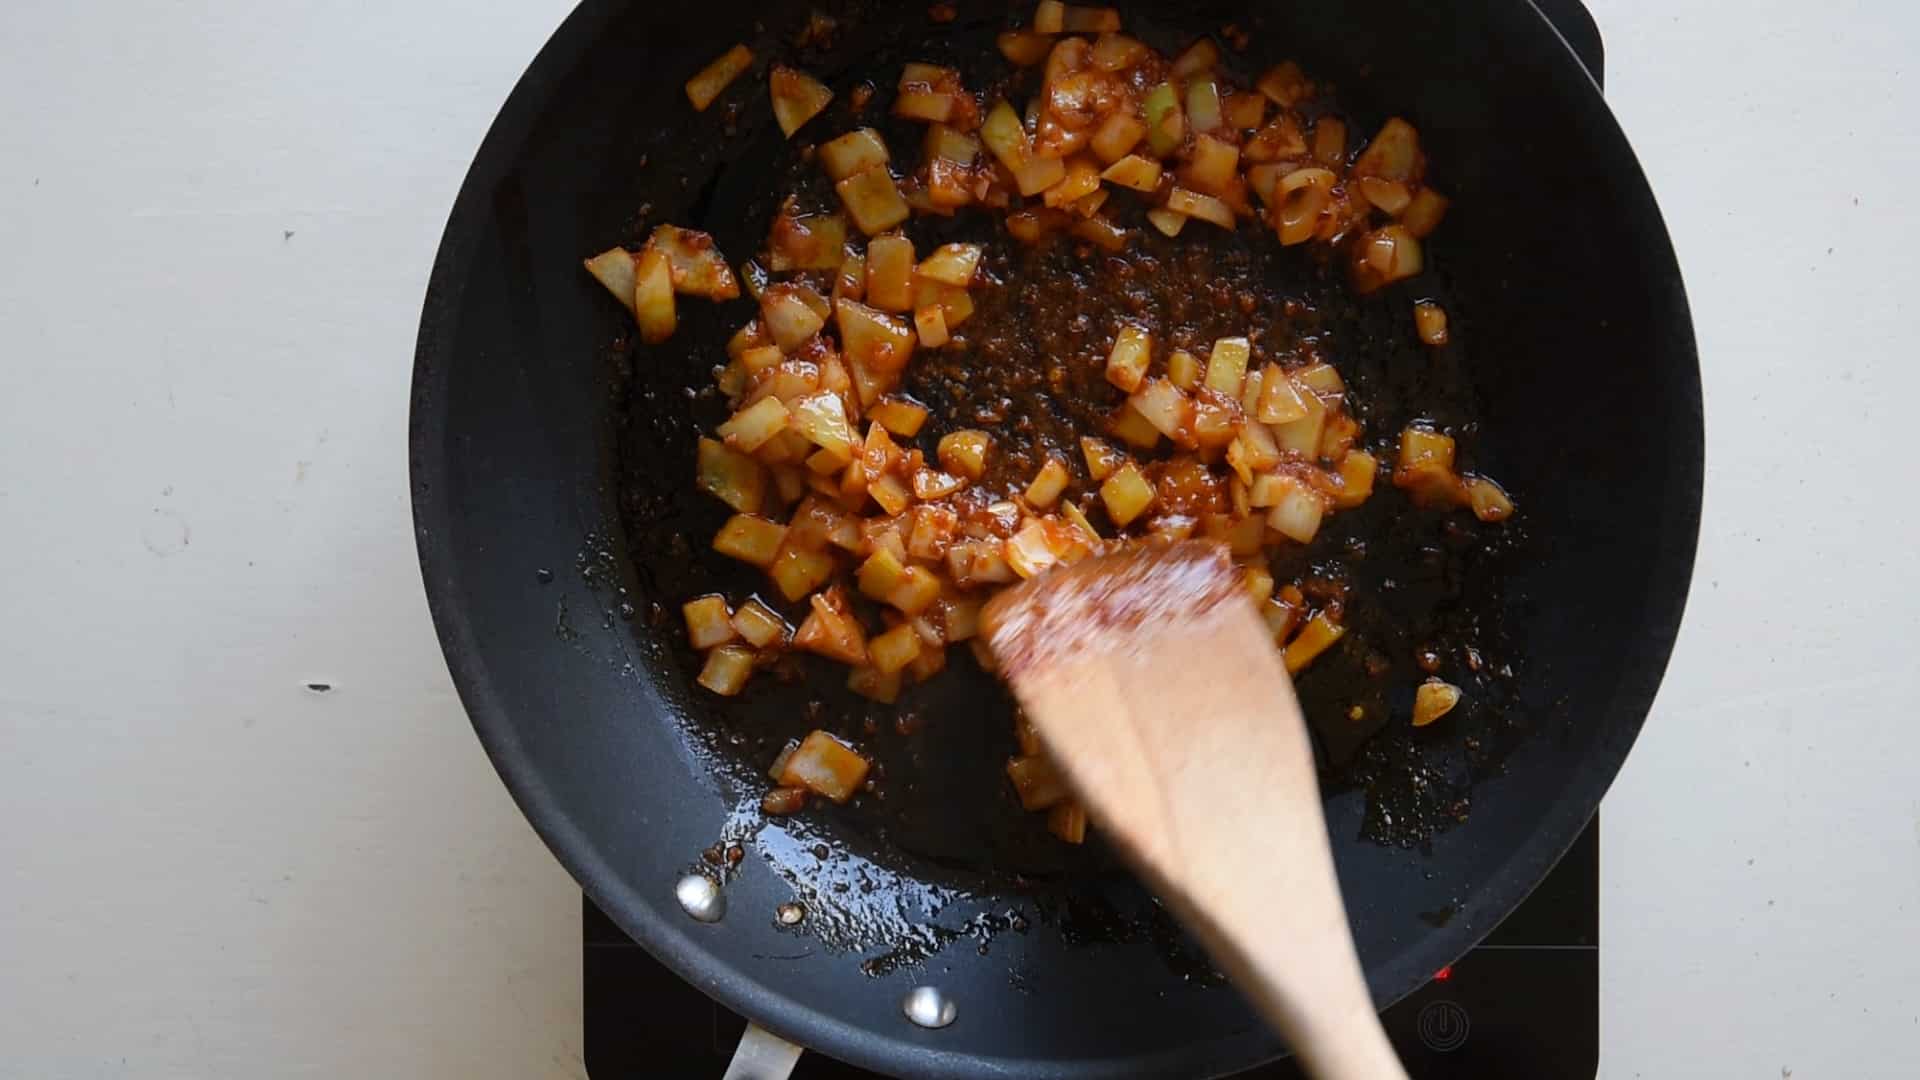 stir fry the onion with the bacon or nduja